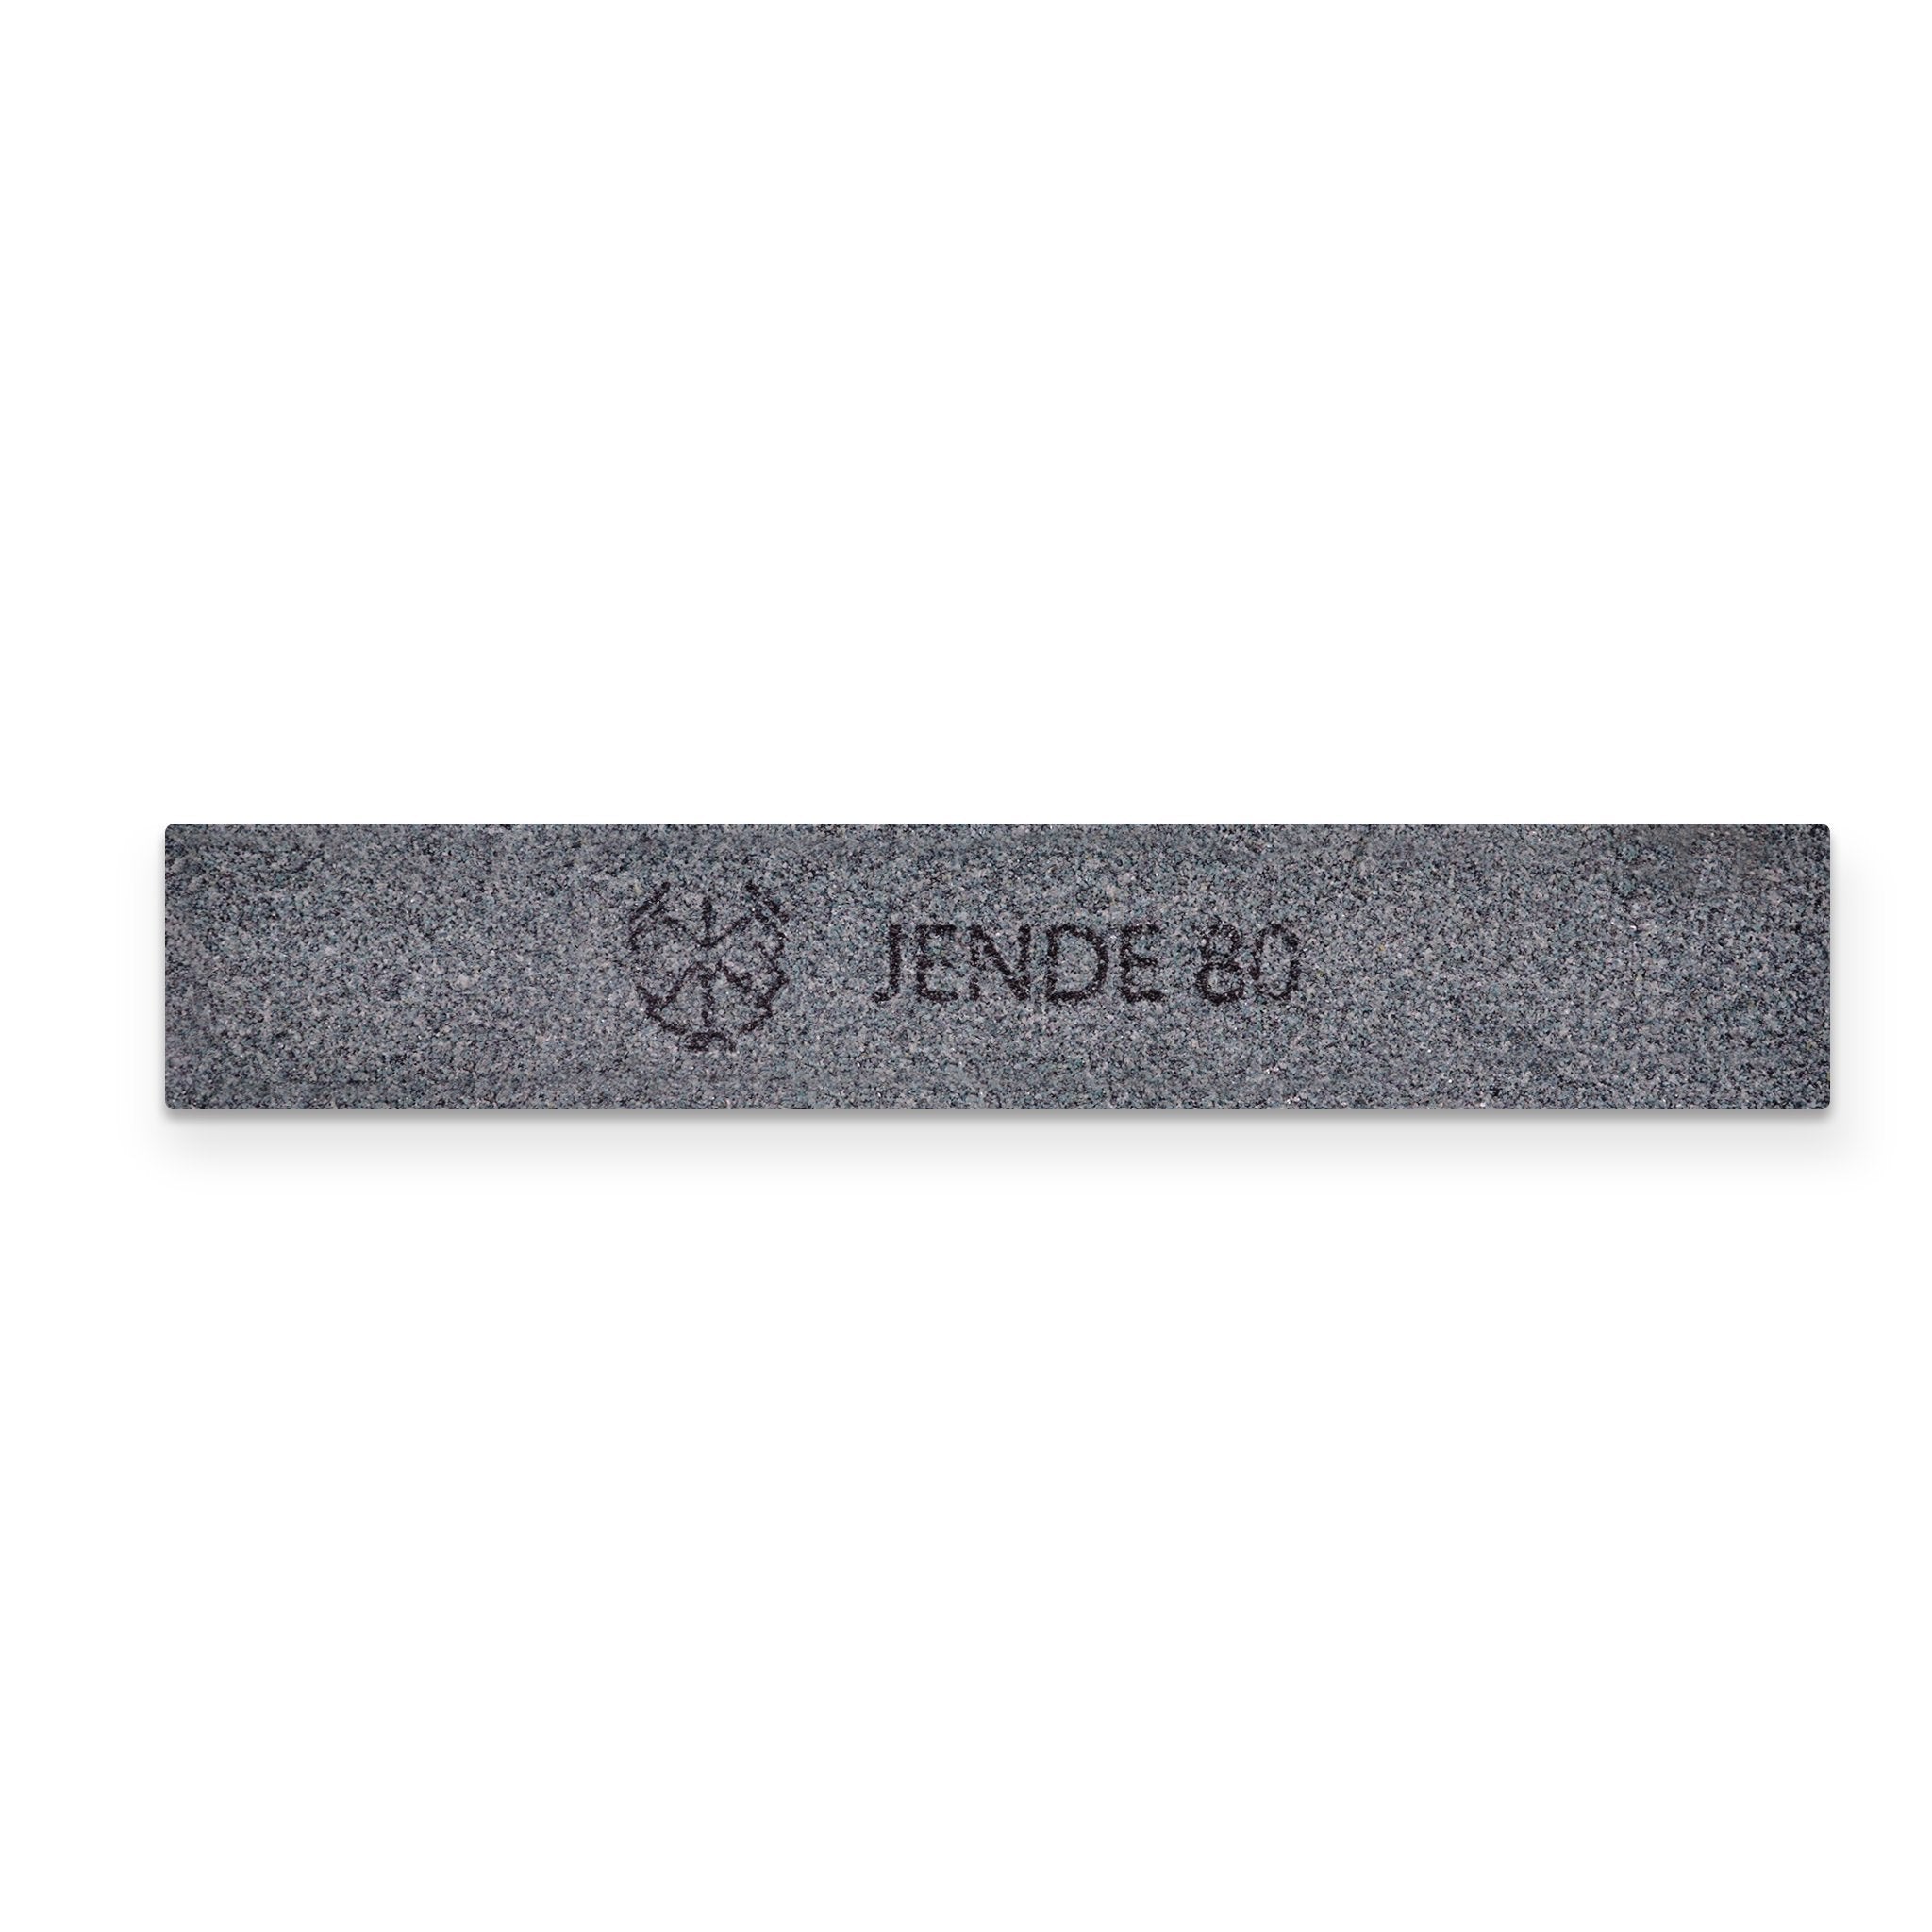 1x6 Jende Silicone Carbide Stones to suit TSPROF, HAPSTONE, Edgepro, JIGS